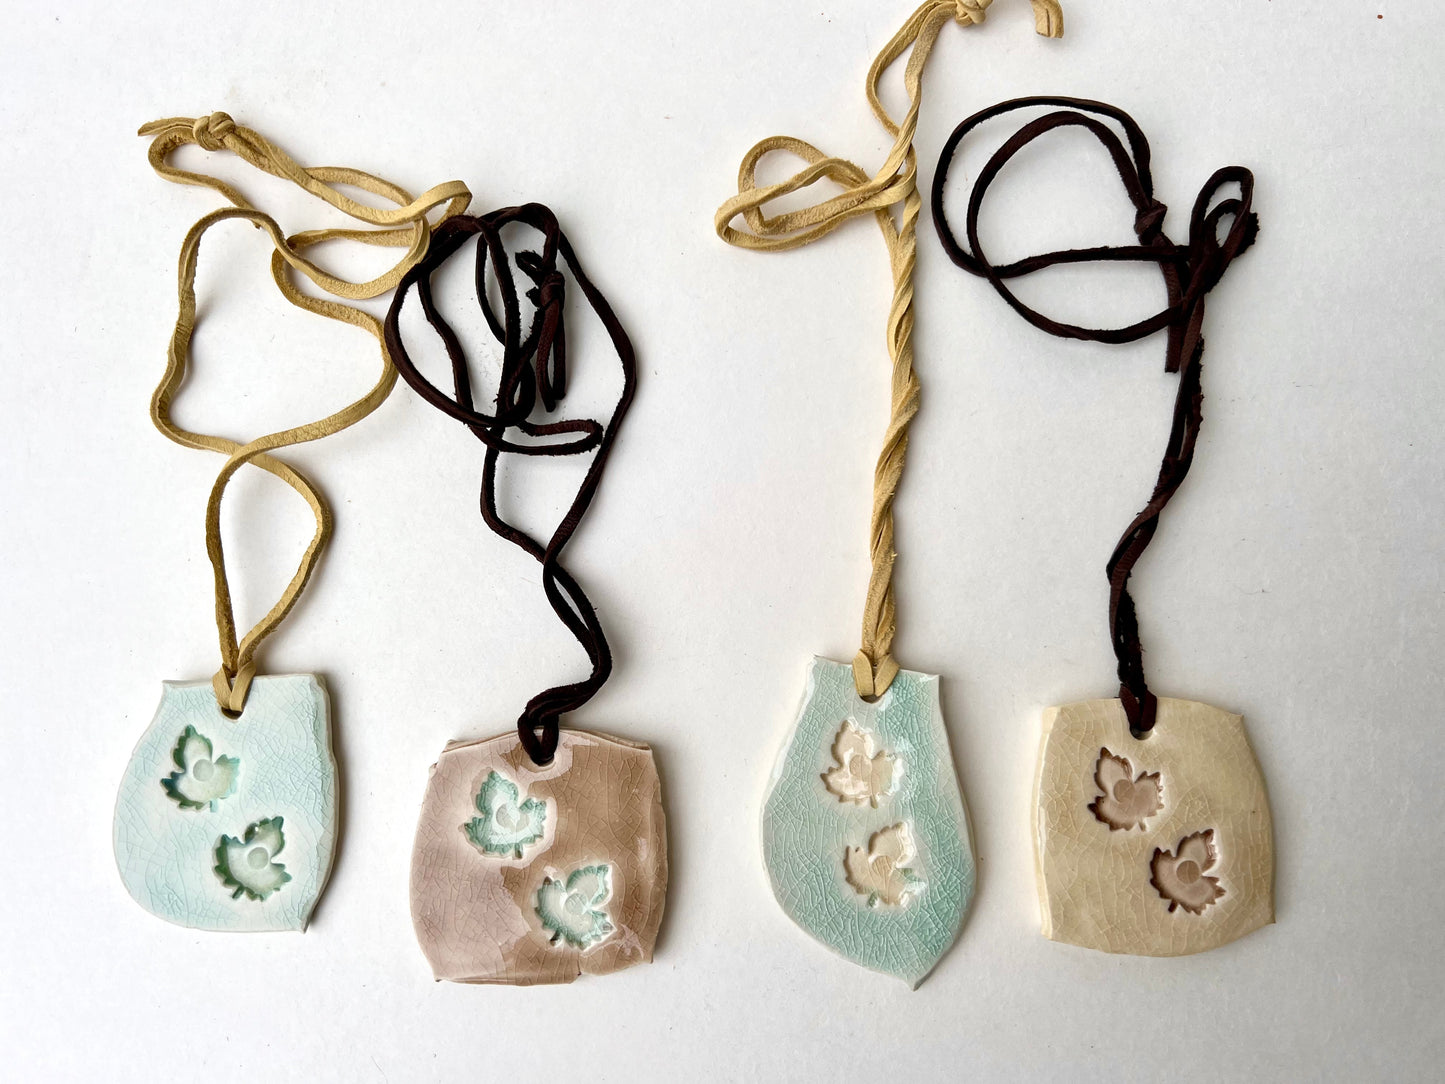 celadon & green tea crackle glaze leaf jewelry on soft butter yellow leather samples/seconds/sale piece